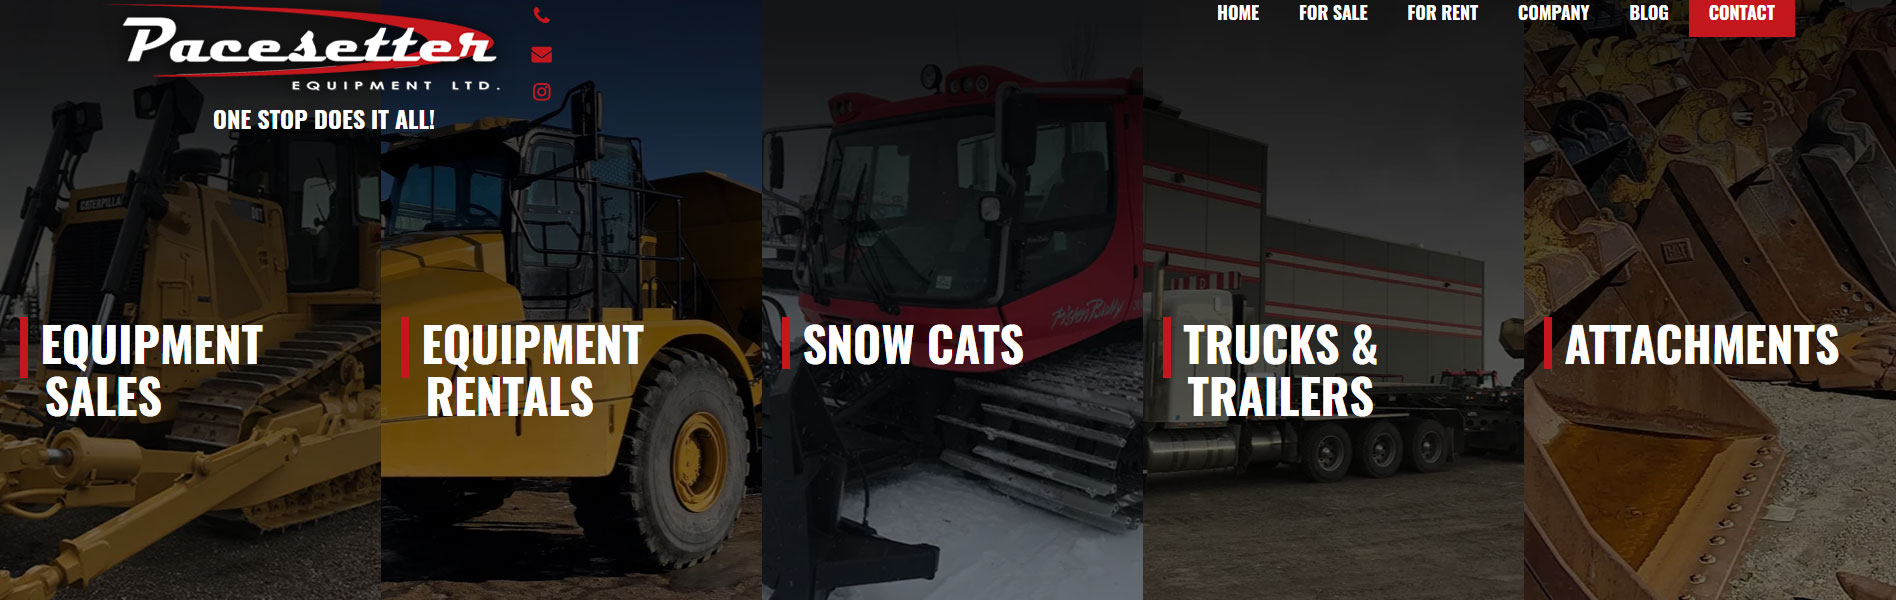 For Heavy Equipment Sales and Rentals, check out our parent company website!